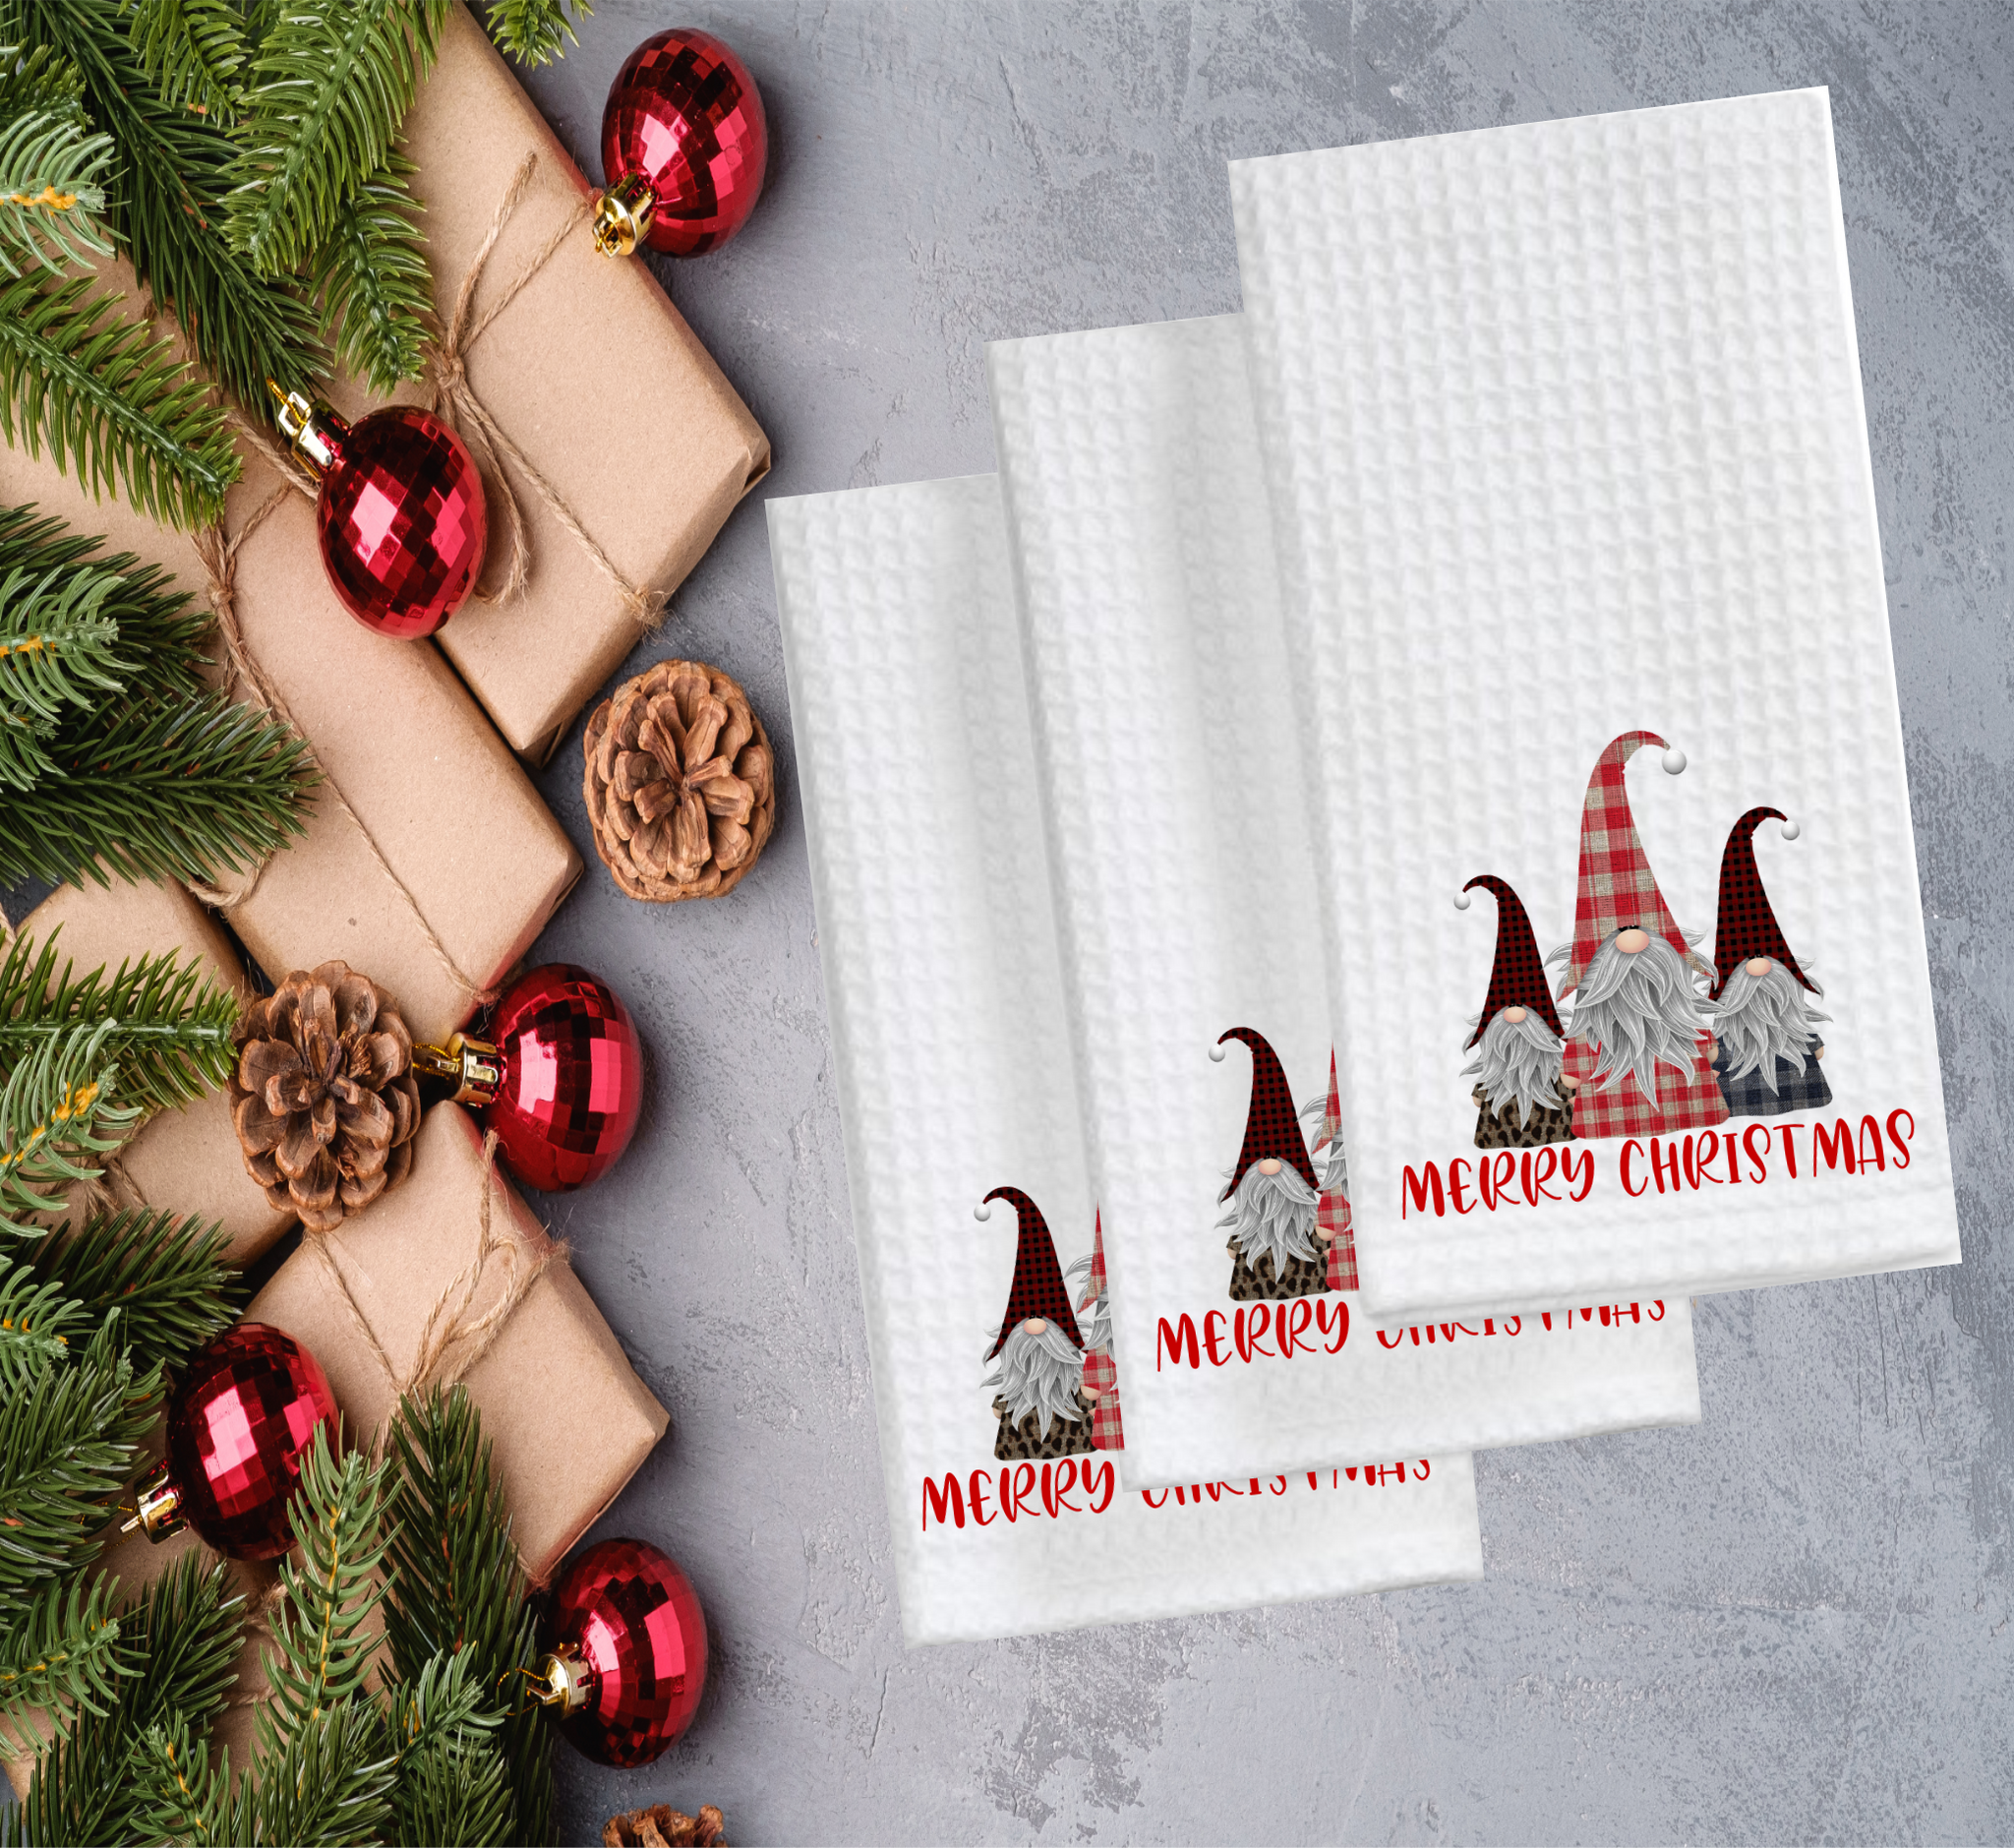  Christmas Hand Towels, Merry Christmas Kitchen Towels